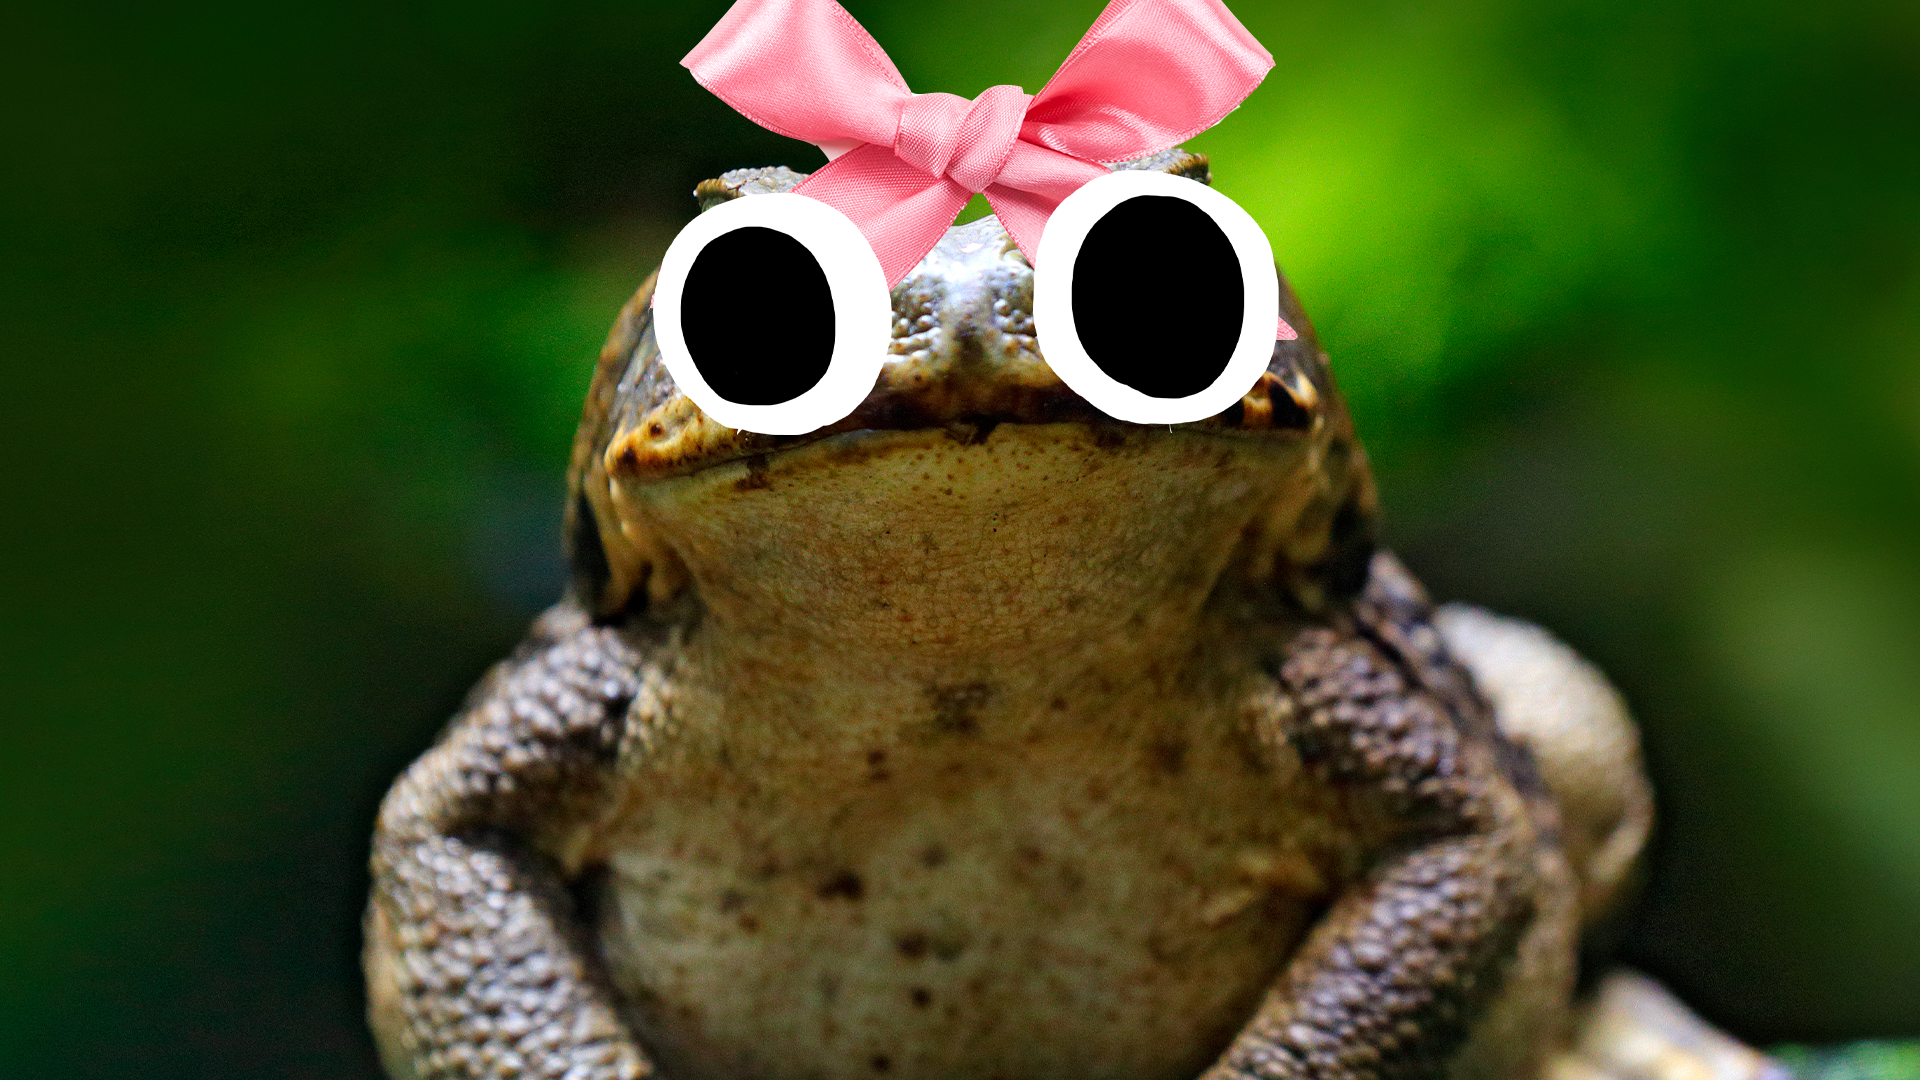 Toad with a pink bow